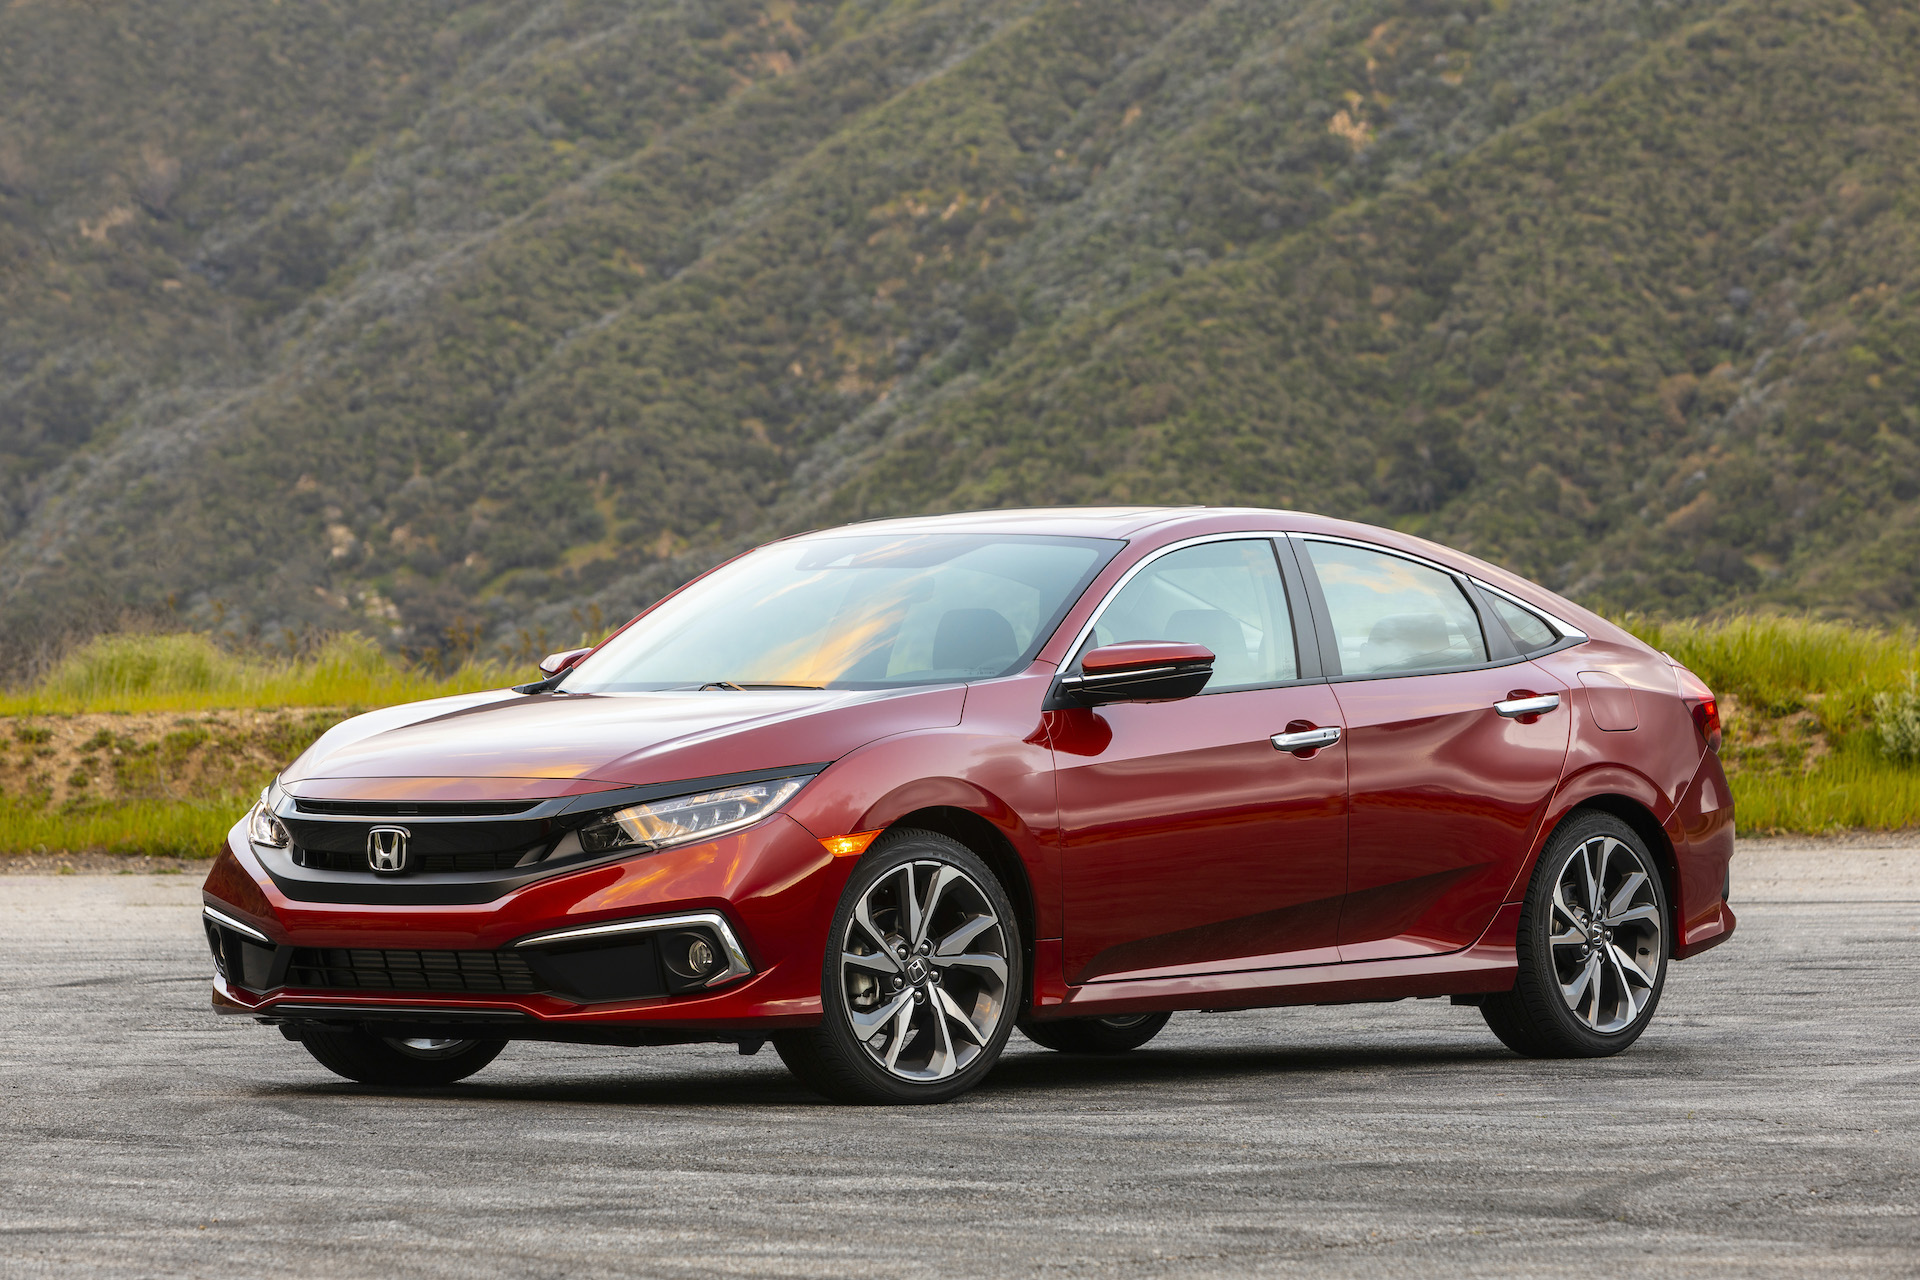 12 Honda Civic Review, Ratings, Specs, Prices, and Photos - The